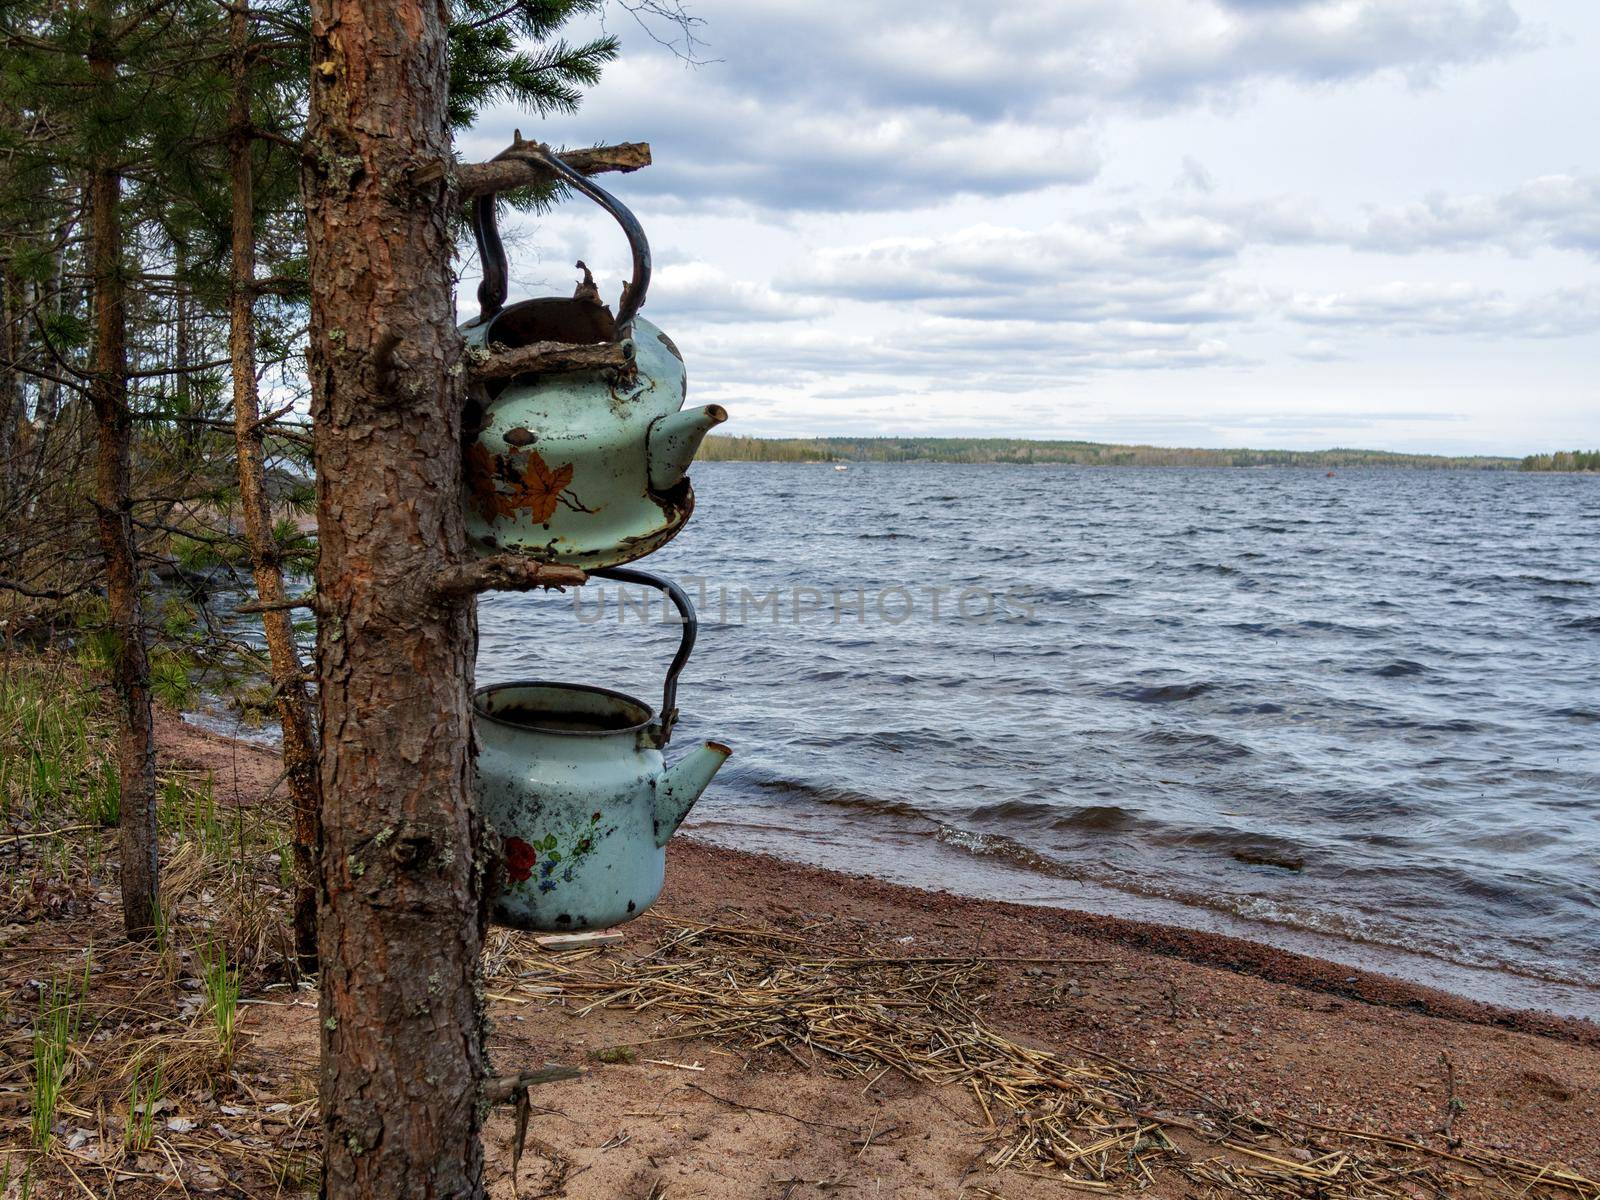 Two old teapots on the background of a calm lake. Two teapots are hanging on a tree in the forest. by Andre1ns